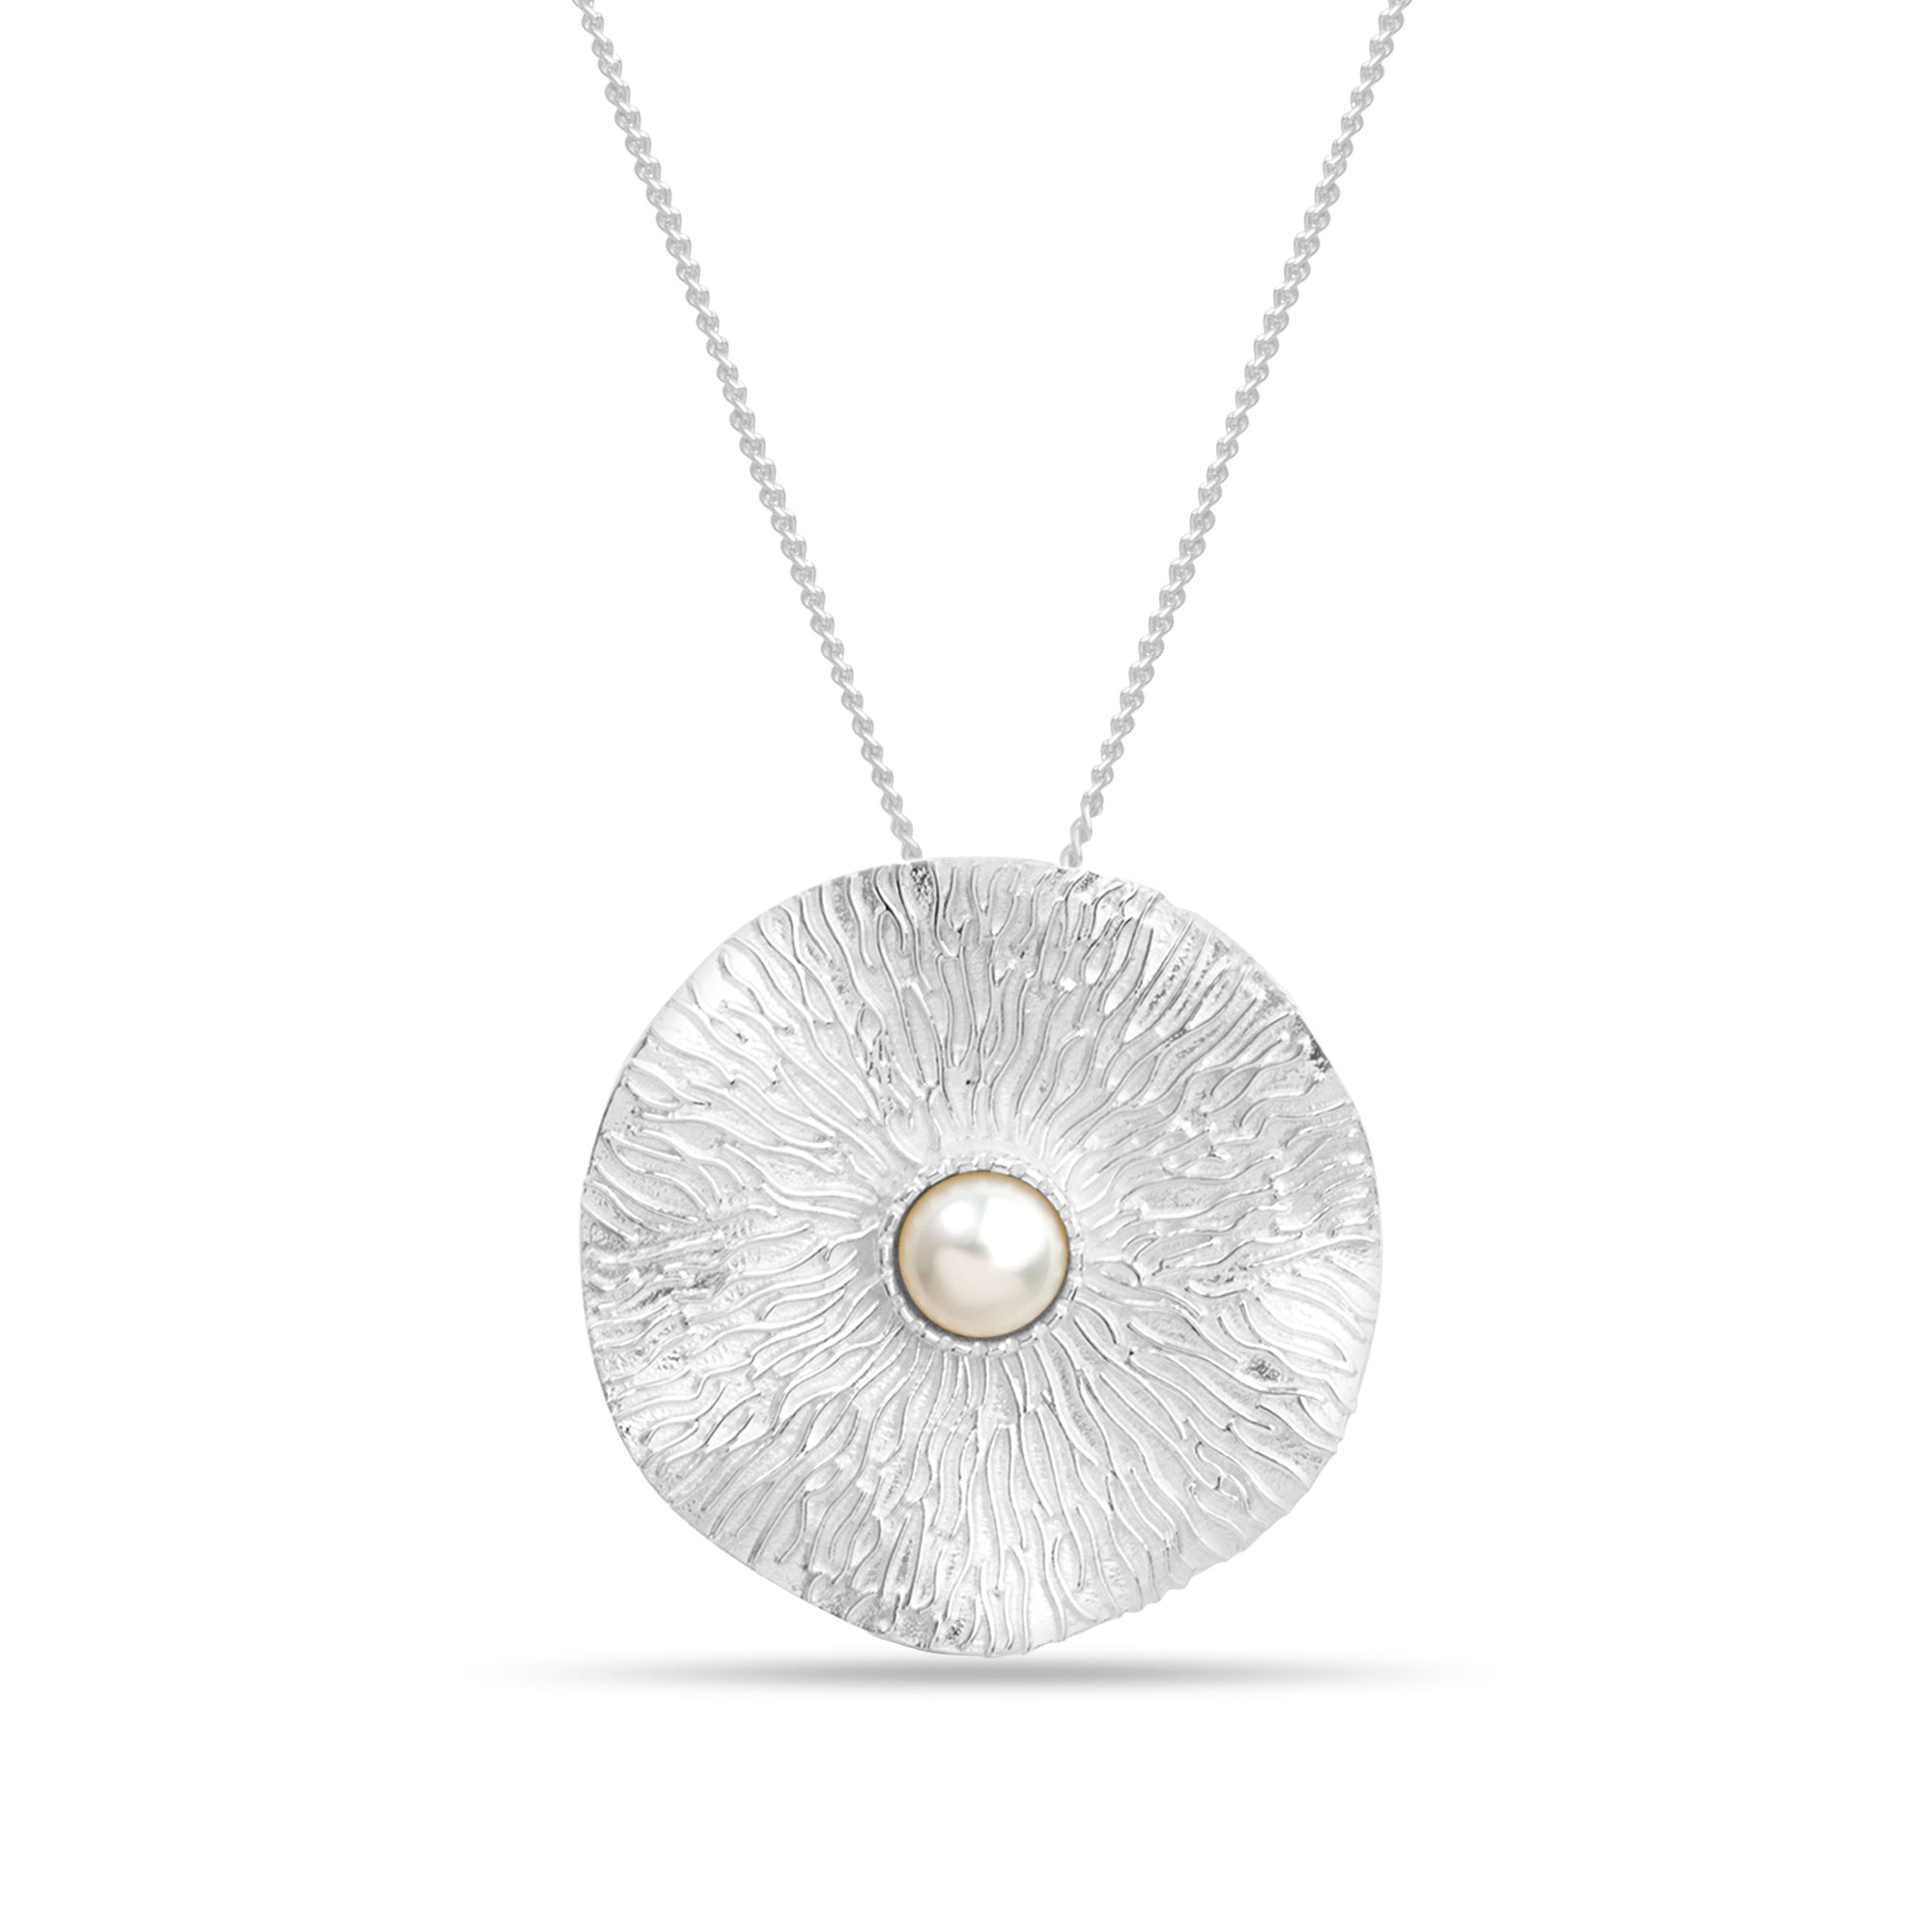 Silver Floral Pendant with Fresh Water Pearls.